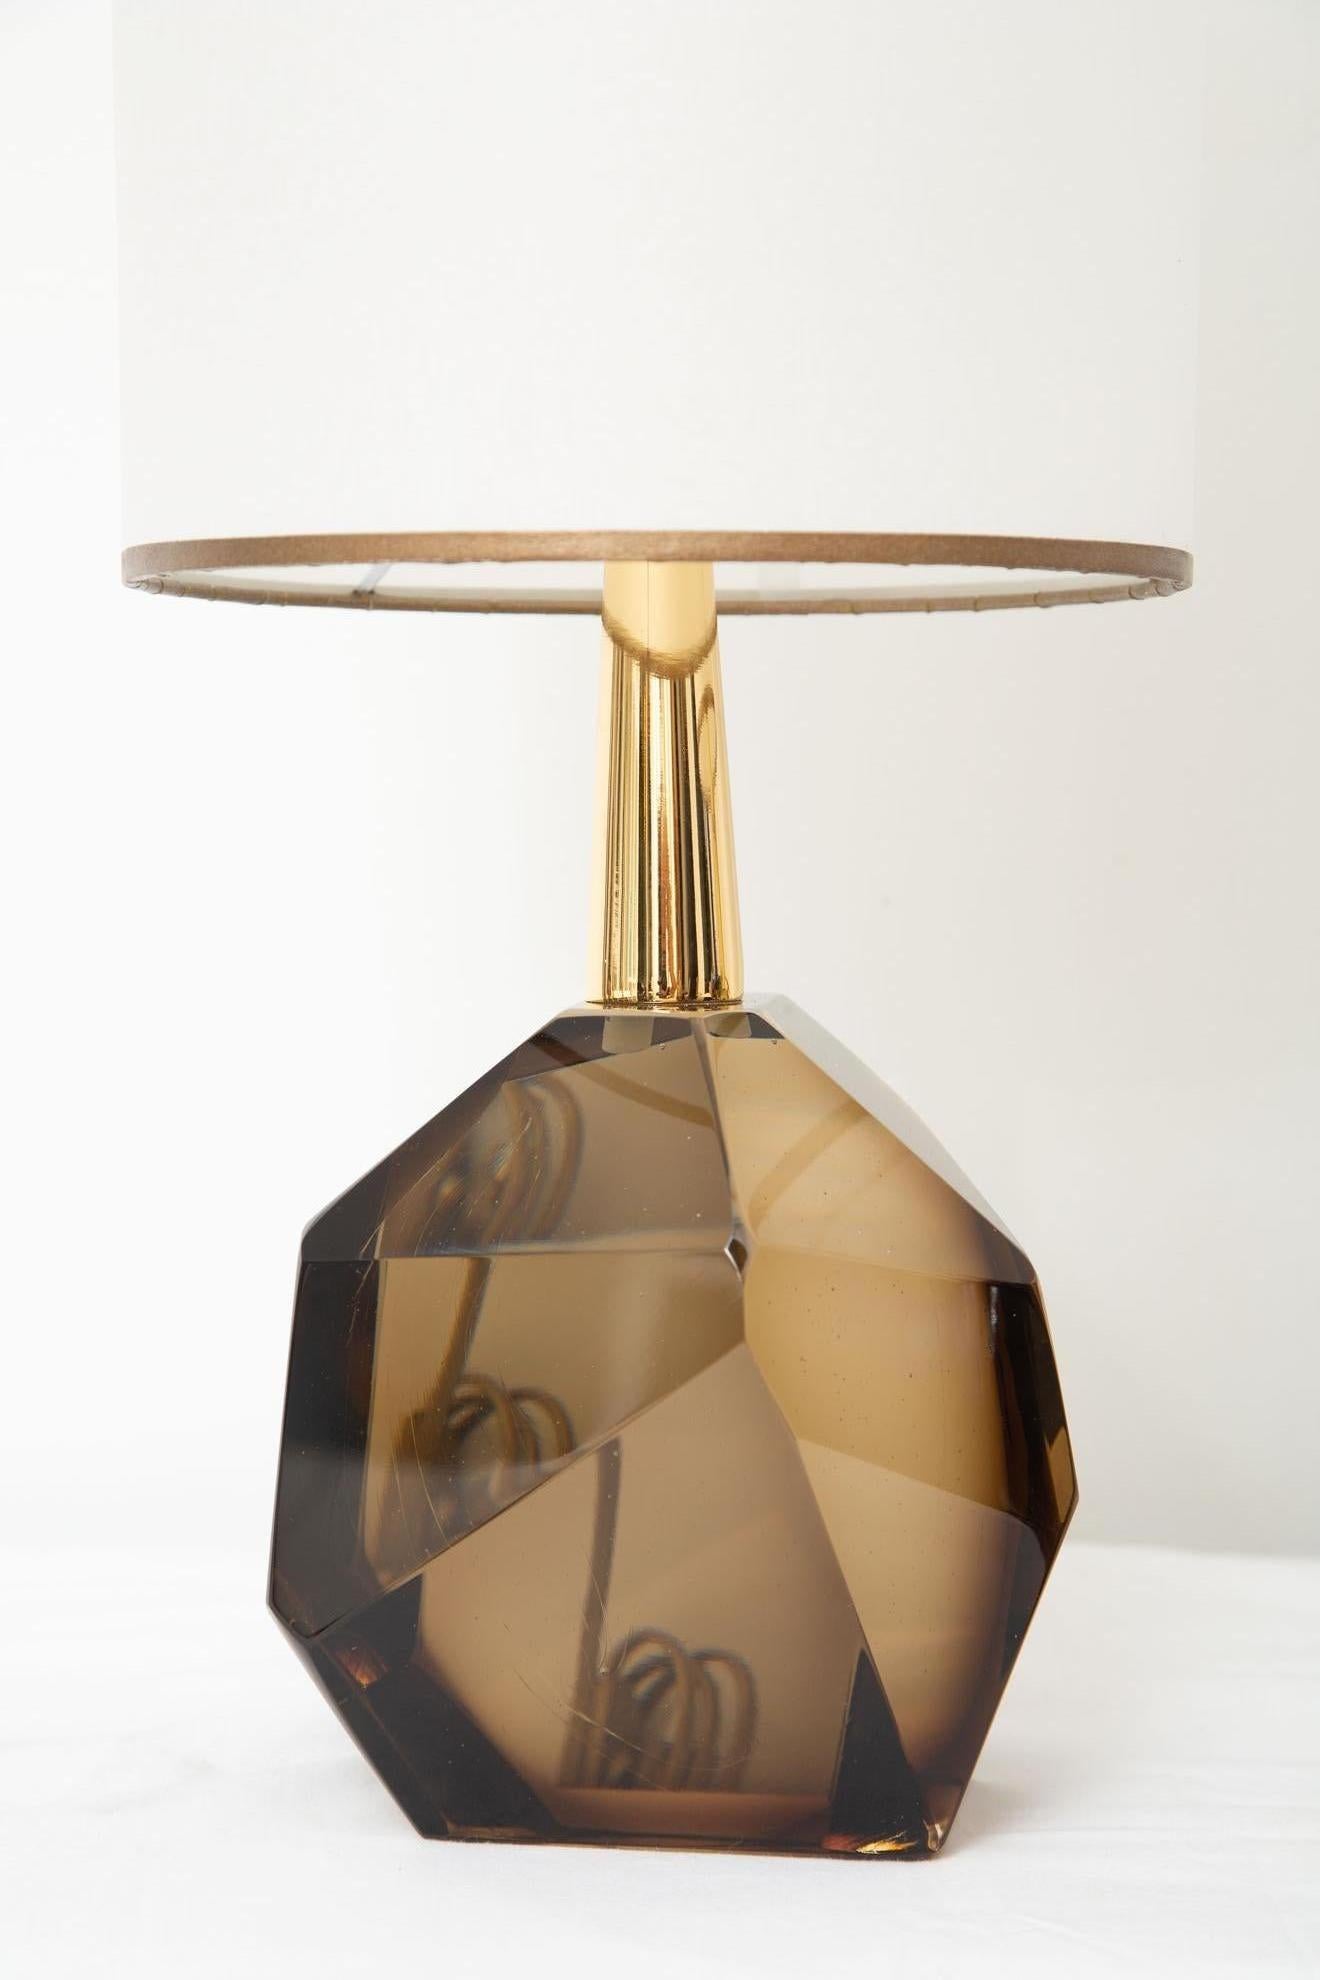 Pair of faceted diamond table lamps, in stock
Studio-made heavy solid rock translucent Murano glass
Fume or bronzed hue
Custom made parchment shades included.
Located in our store in Miami ready for shipping now.
Priced per pair
Wired to the US